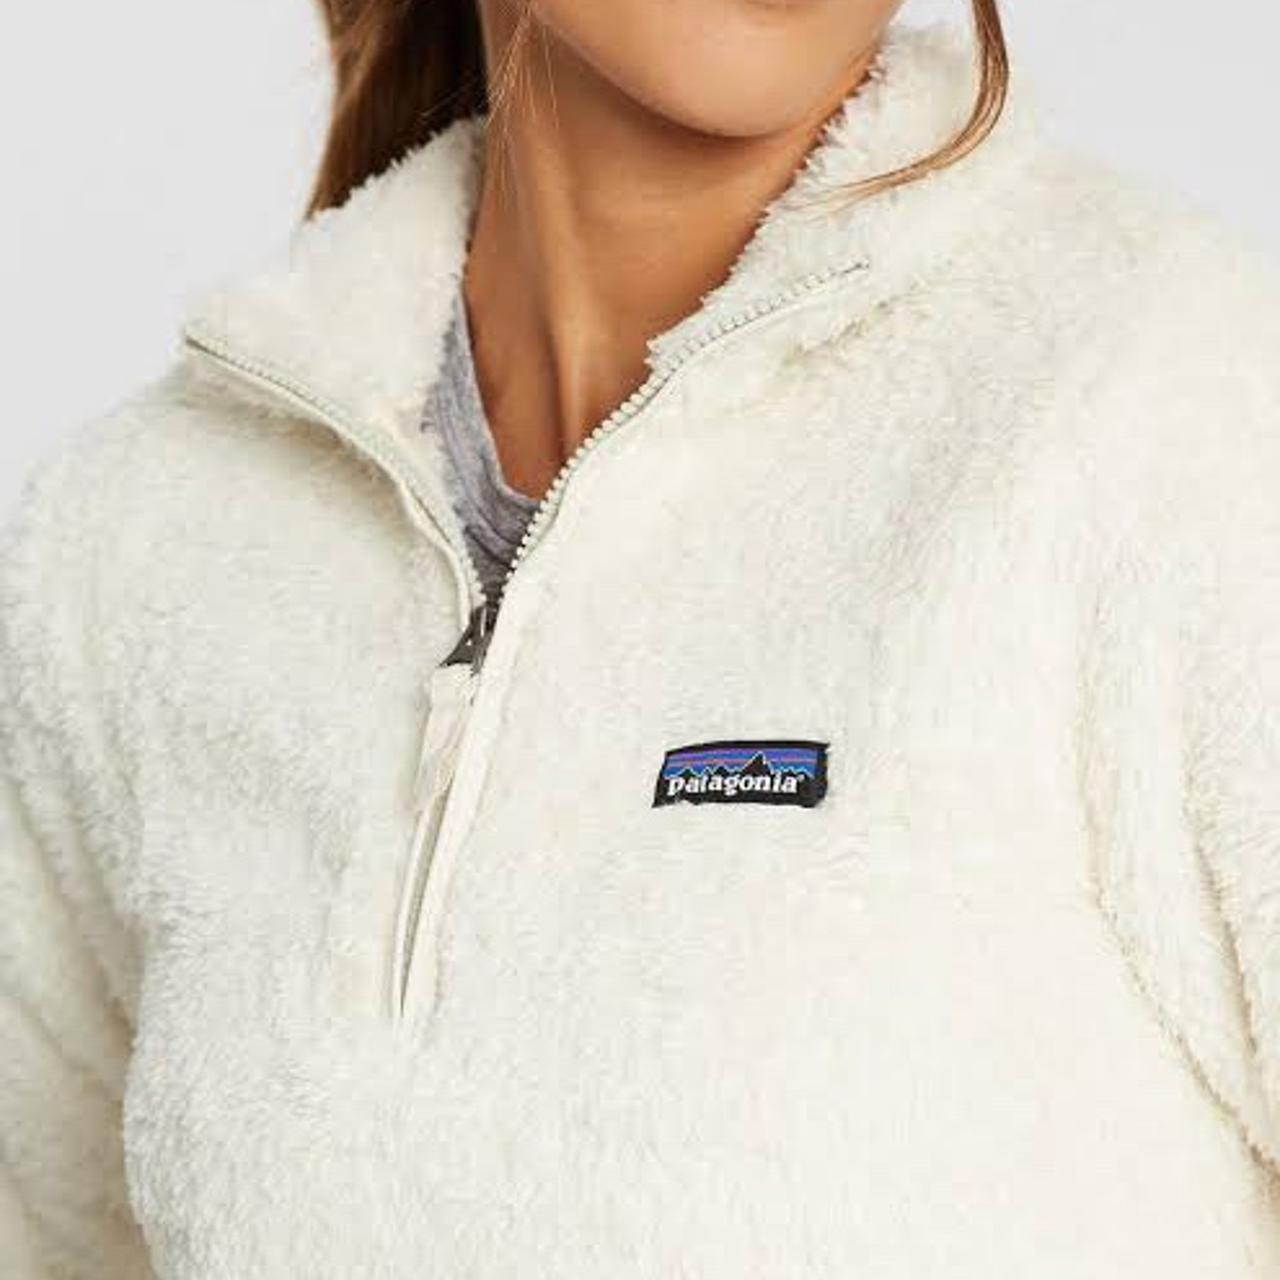 Patagonia Los Gatos Hooded Pullover Women's - Trailhead Paddle Shack